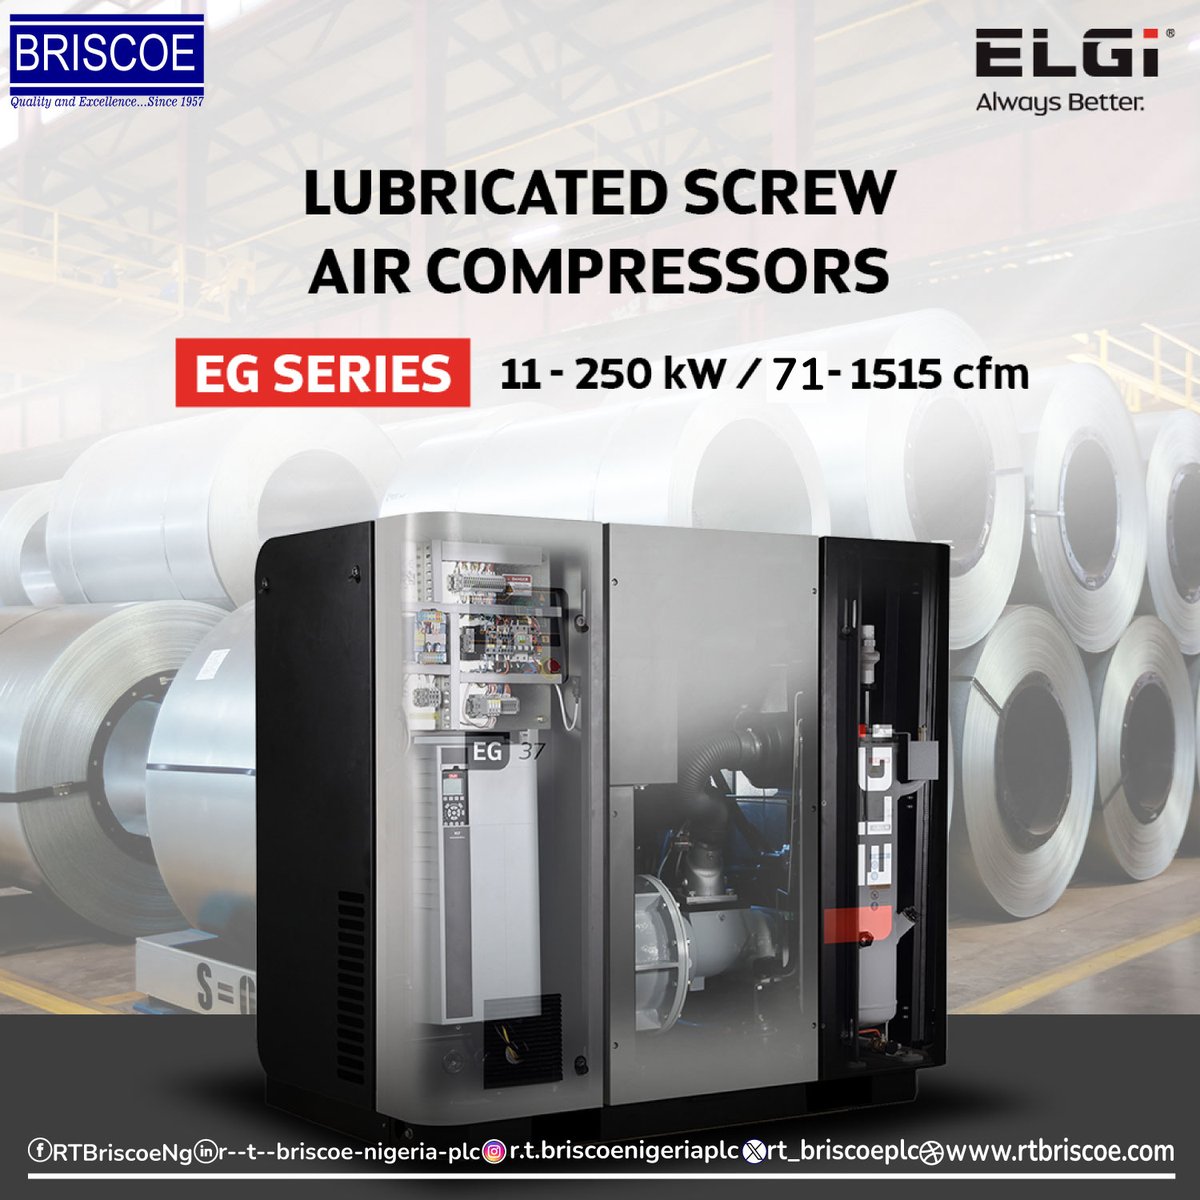 Unlock Efficiency, Power, and Reliability with Elgi Lubricated Screw Air Compressor at R.T. Briscoe Nigeria plc.

#briscoetechnicalproductsandservices #rtbriscoenigeriaplc #elgiaircompressor #efficiency #perfomance #wednesdaycrush #wednesdayproduct #textile #industrialsolutions